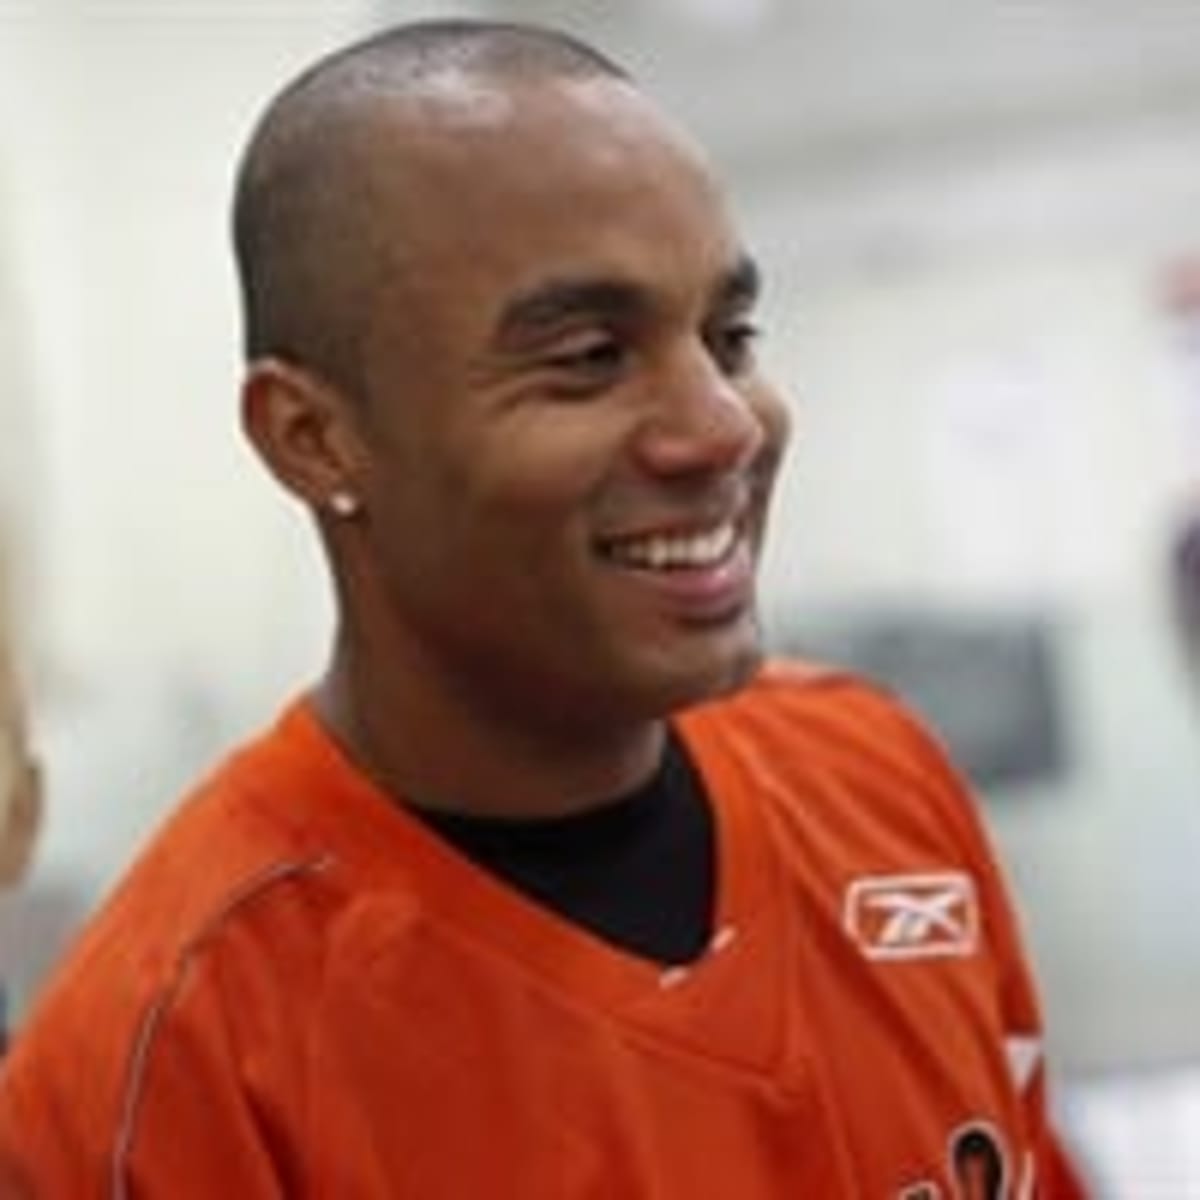 Honoring The Memory of Former Anaheim Ducks Goalie, Ray Emery - Page 2